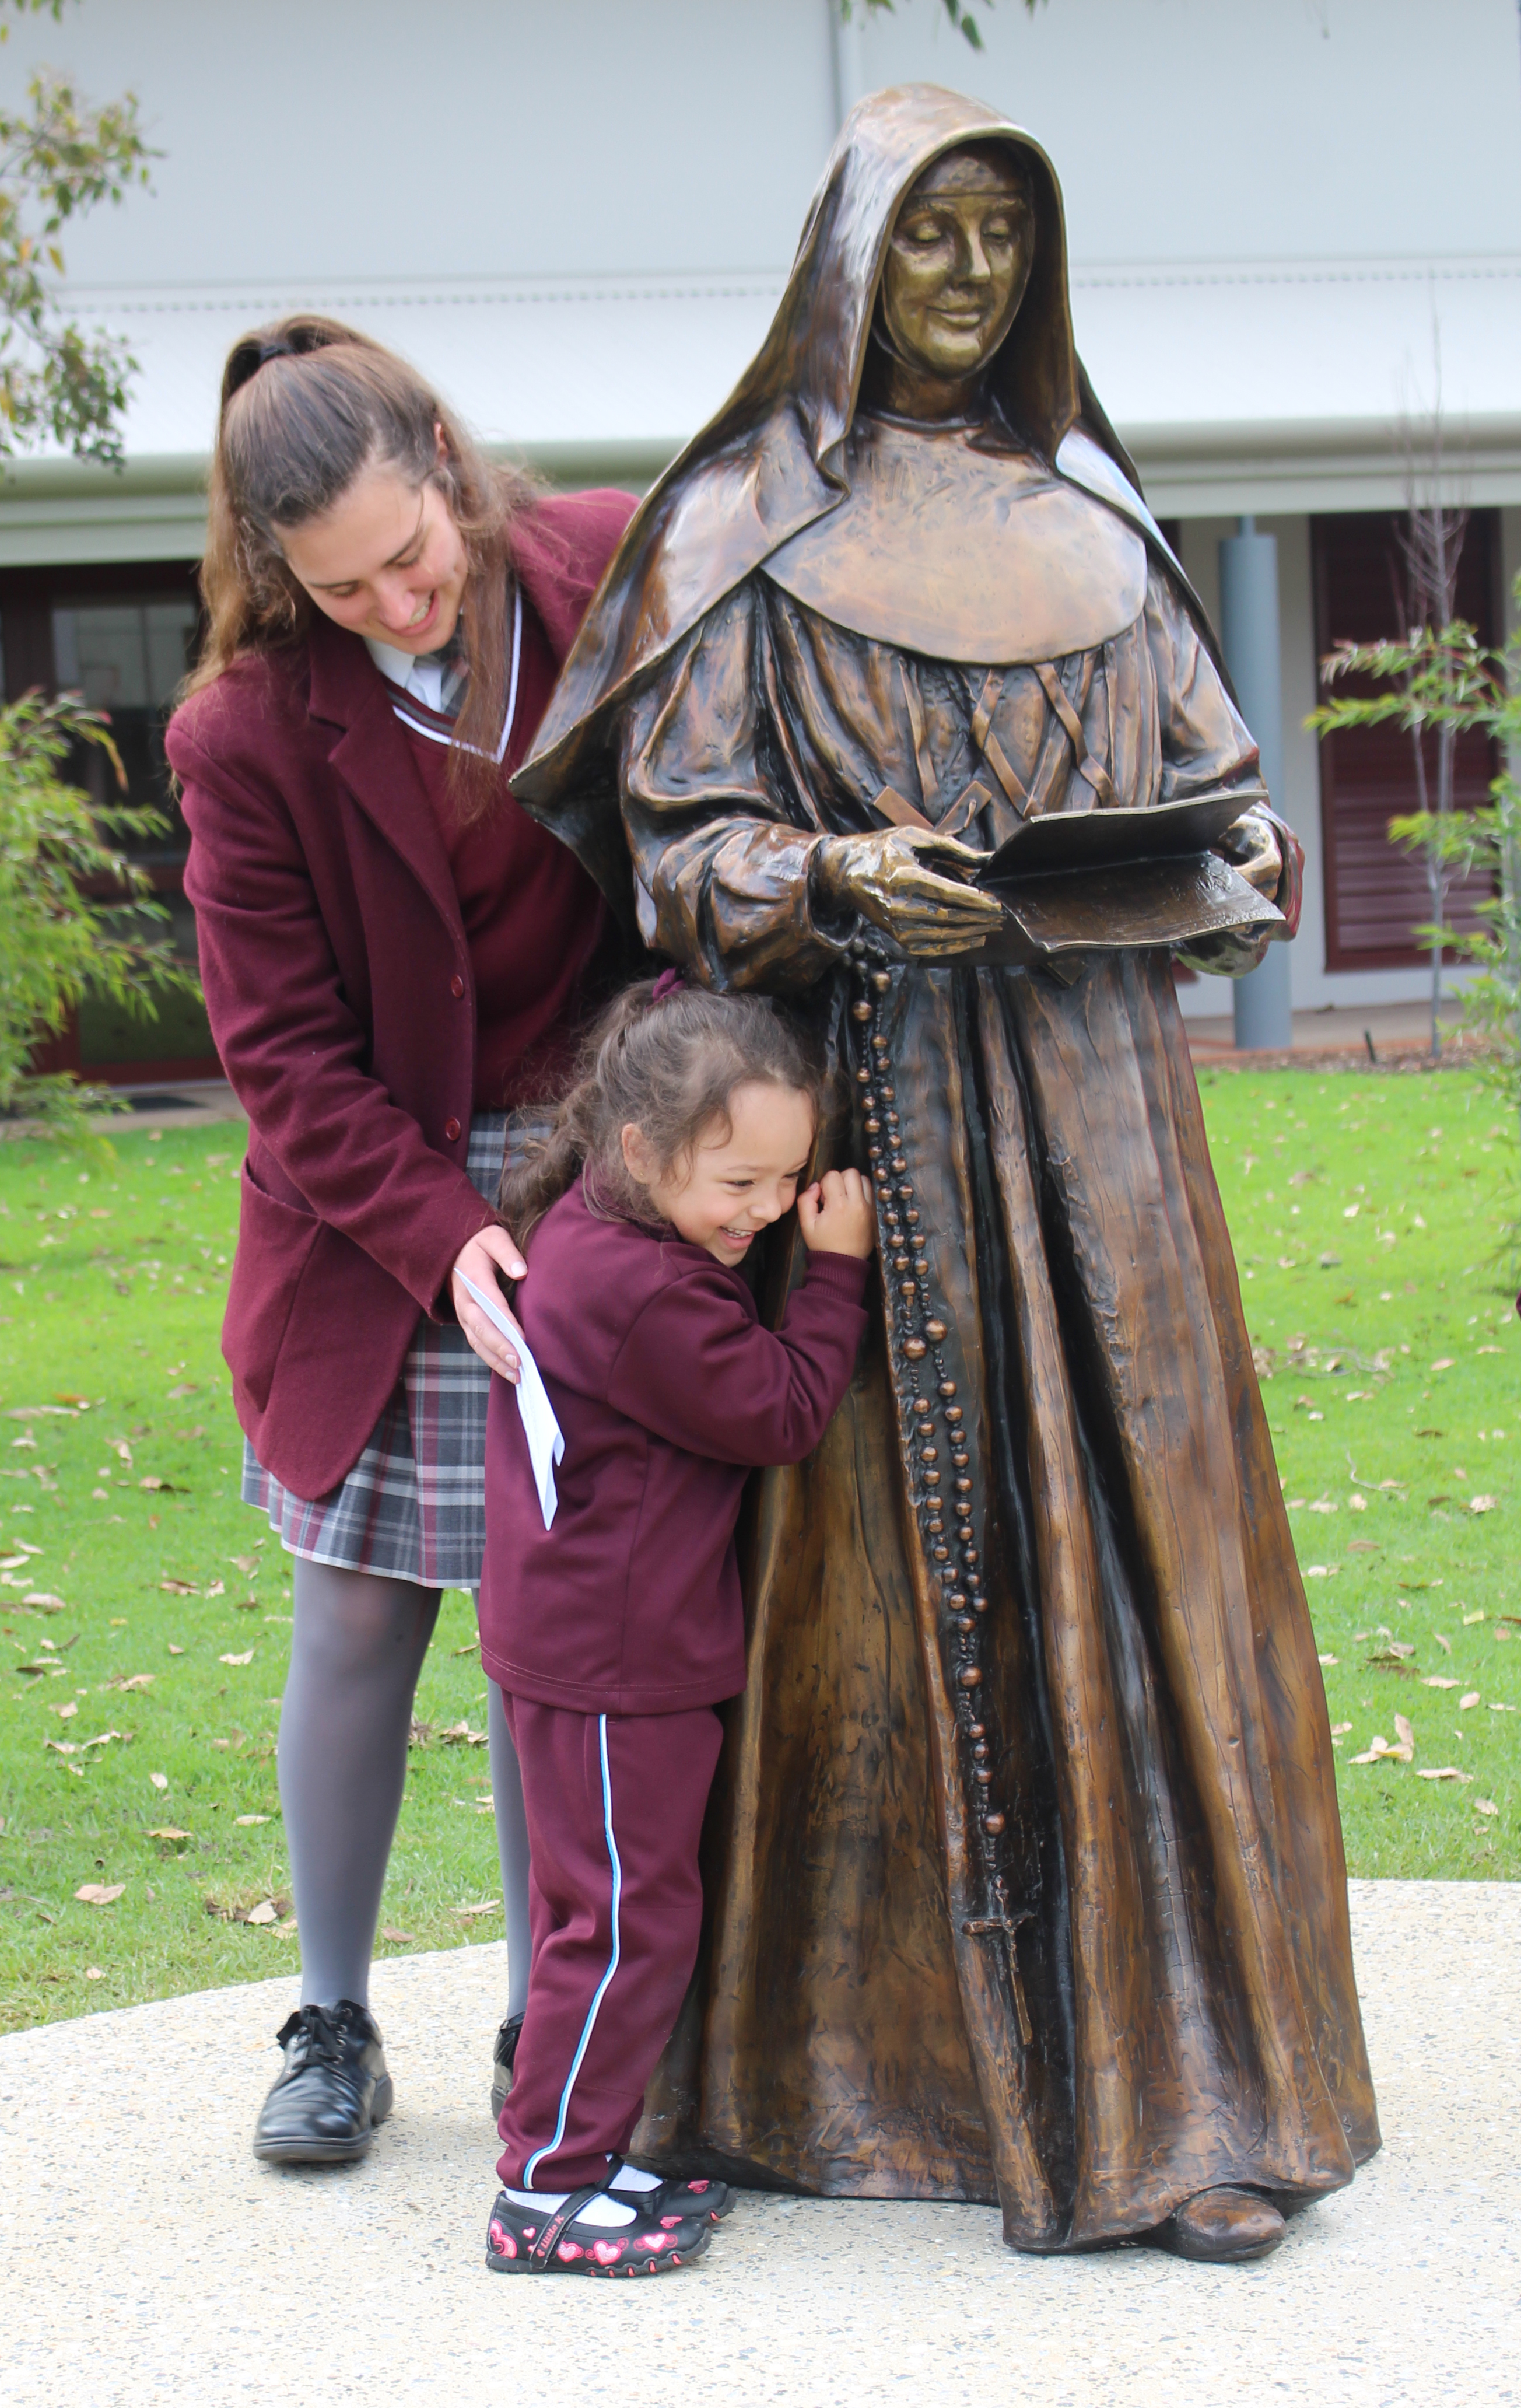 Head Girl and Kindy girl with Mary IMG_3610 crop